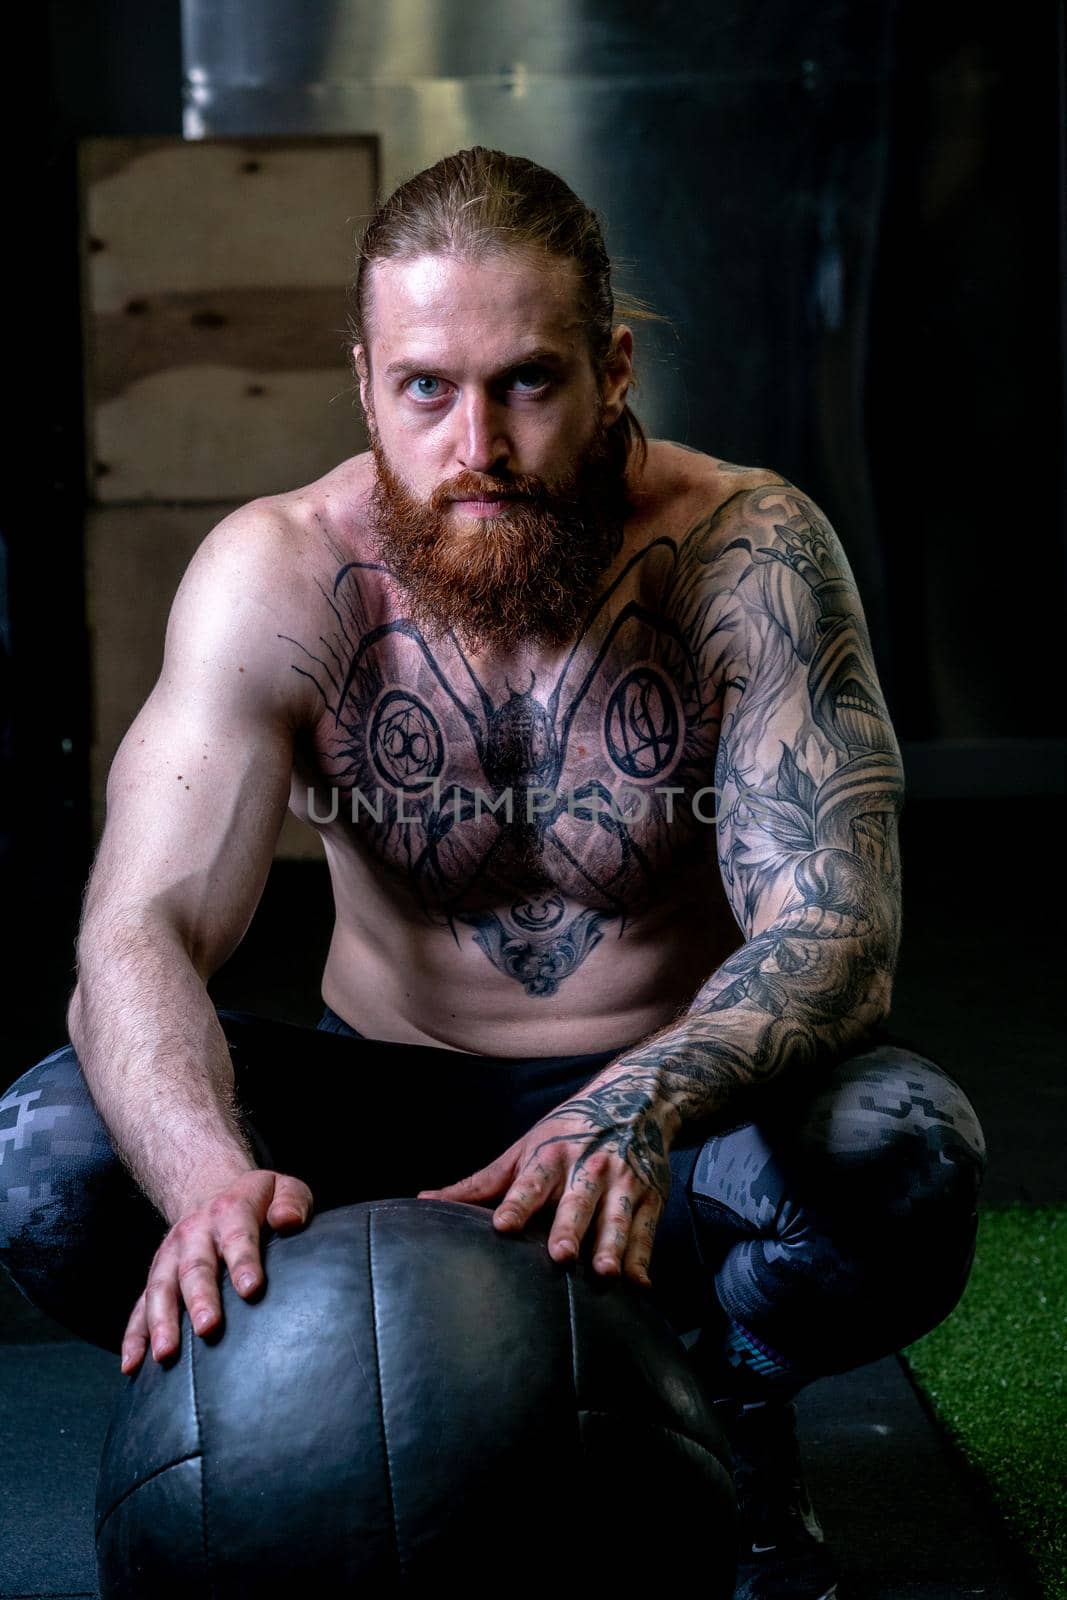 Ball - tattoo ups sits push beard man athletic body exercise, concept athlete strong from muscle from fit bodybuilding, guy lifestyle. Builder protein build, by 89167702191